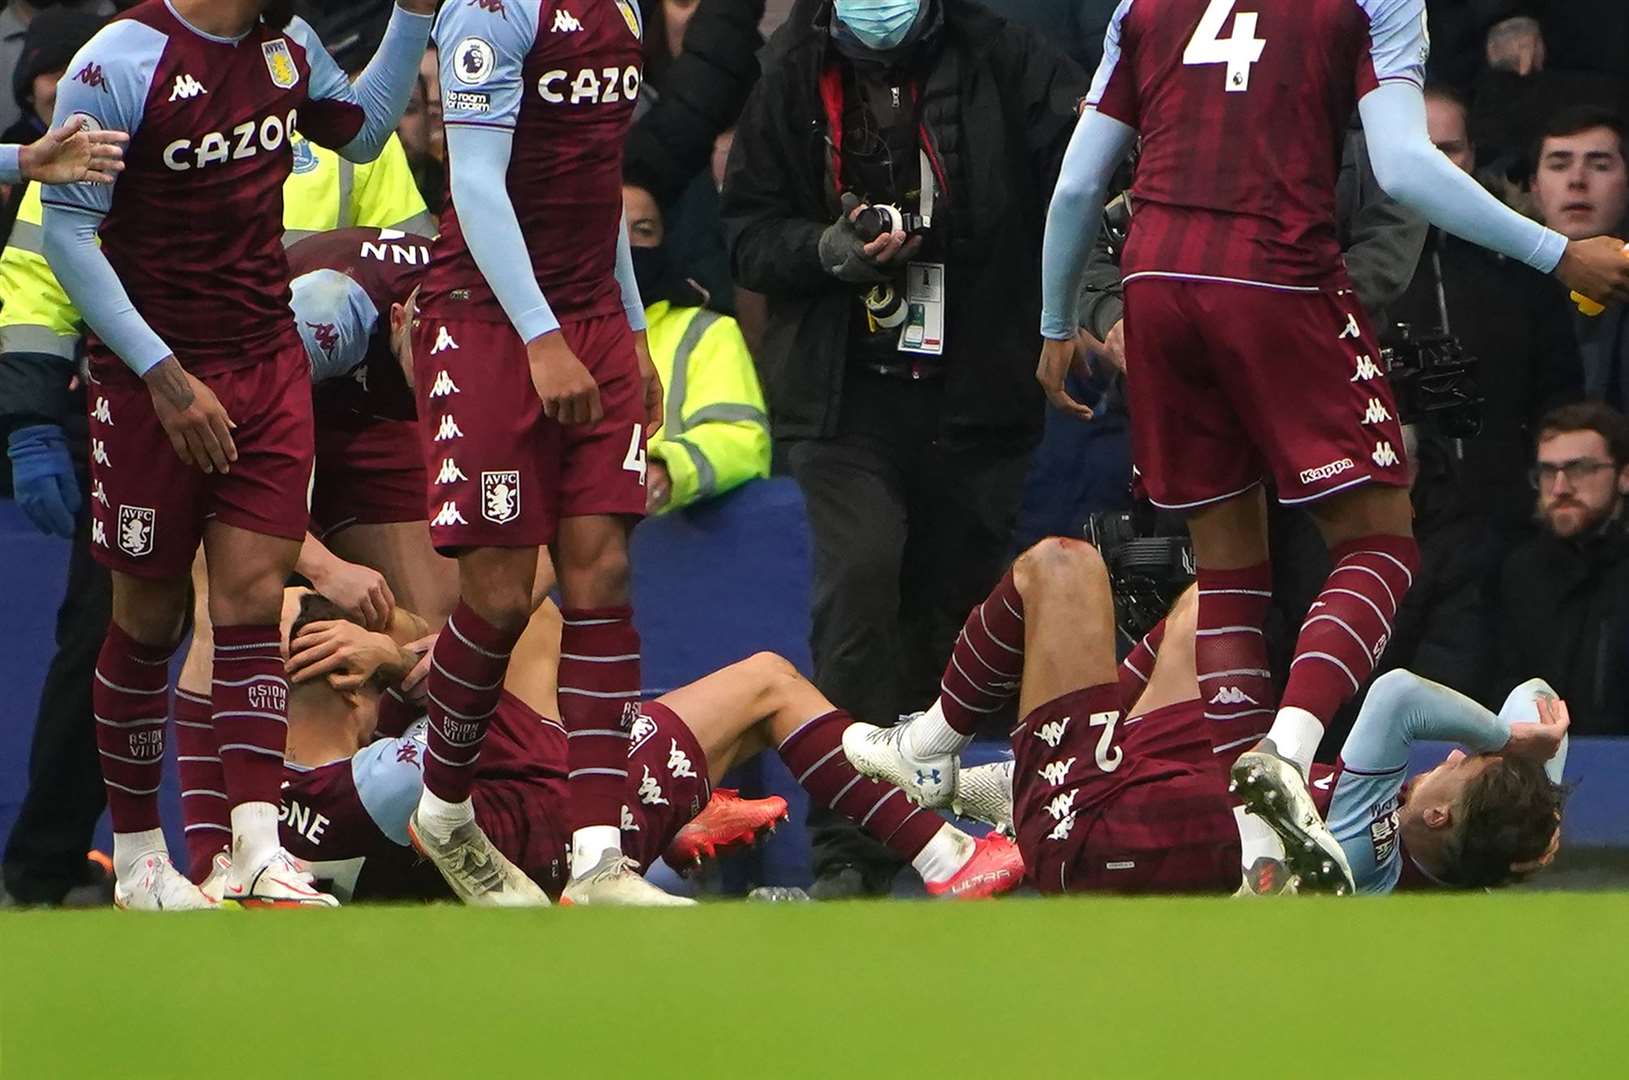 The players went down after the incident as Aston Villa celebrated a goal in the first half of the match (PA)